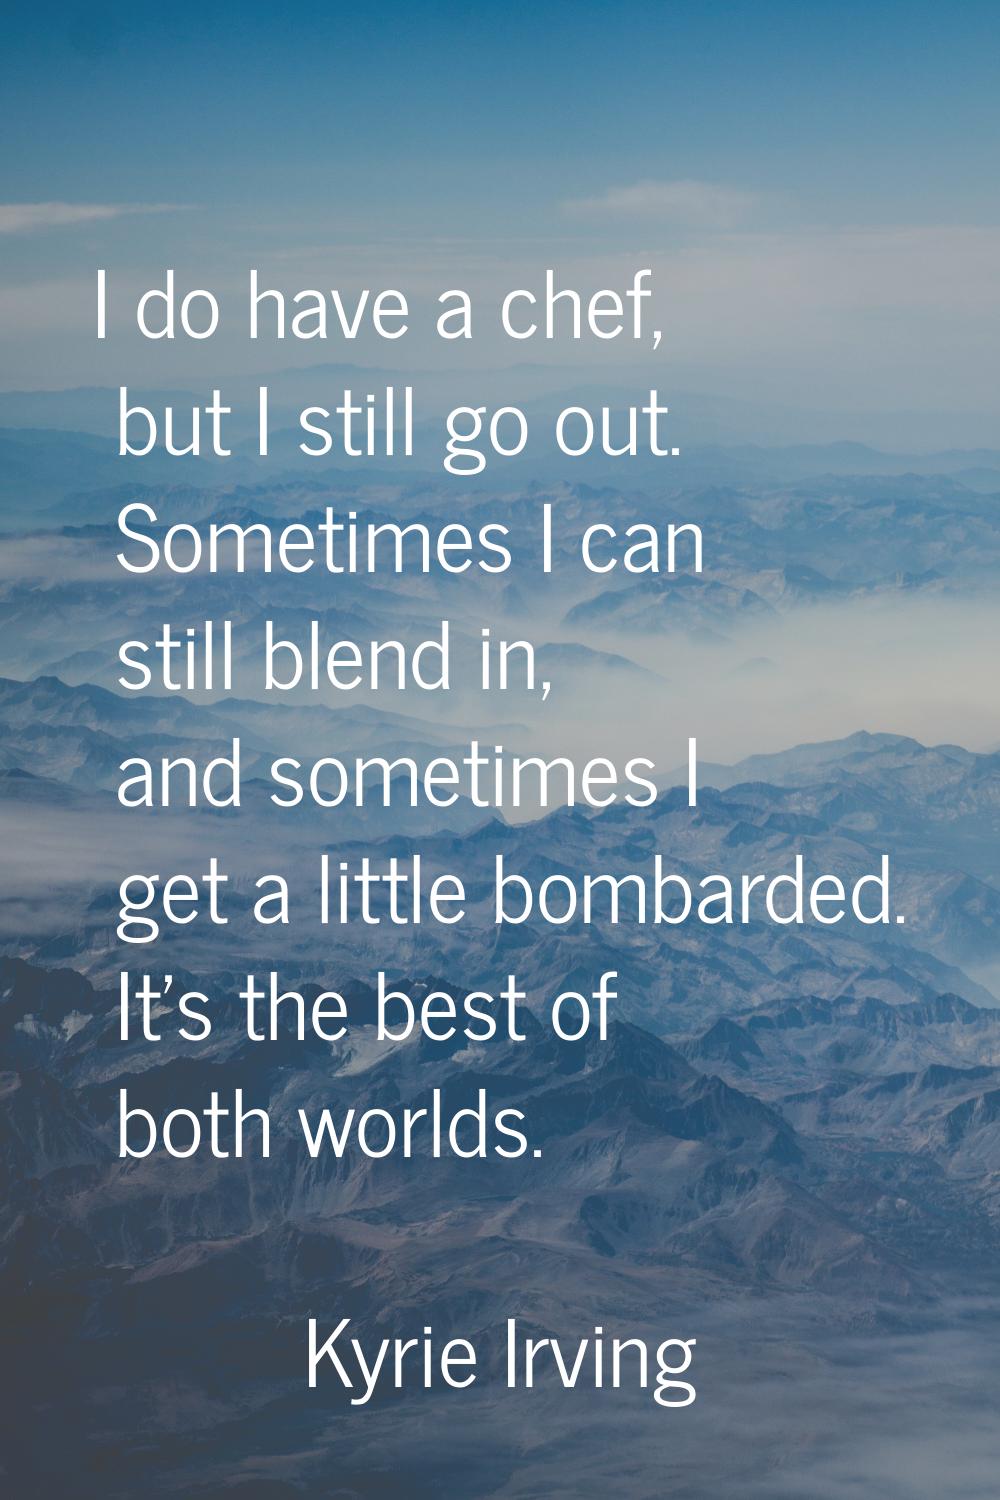 I do have a chef, but I still go out. Sometimes I can still blend in, and sometimes I get a little 